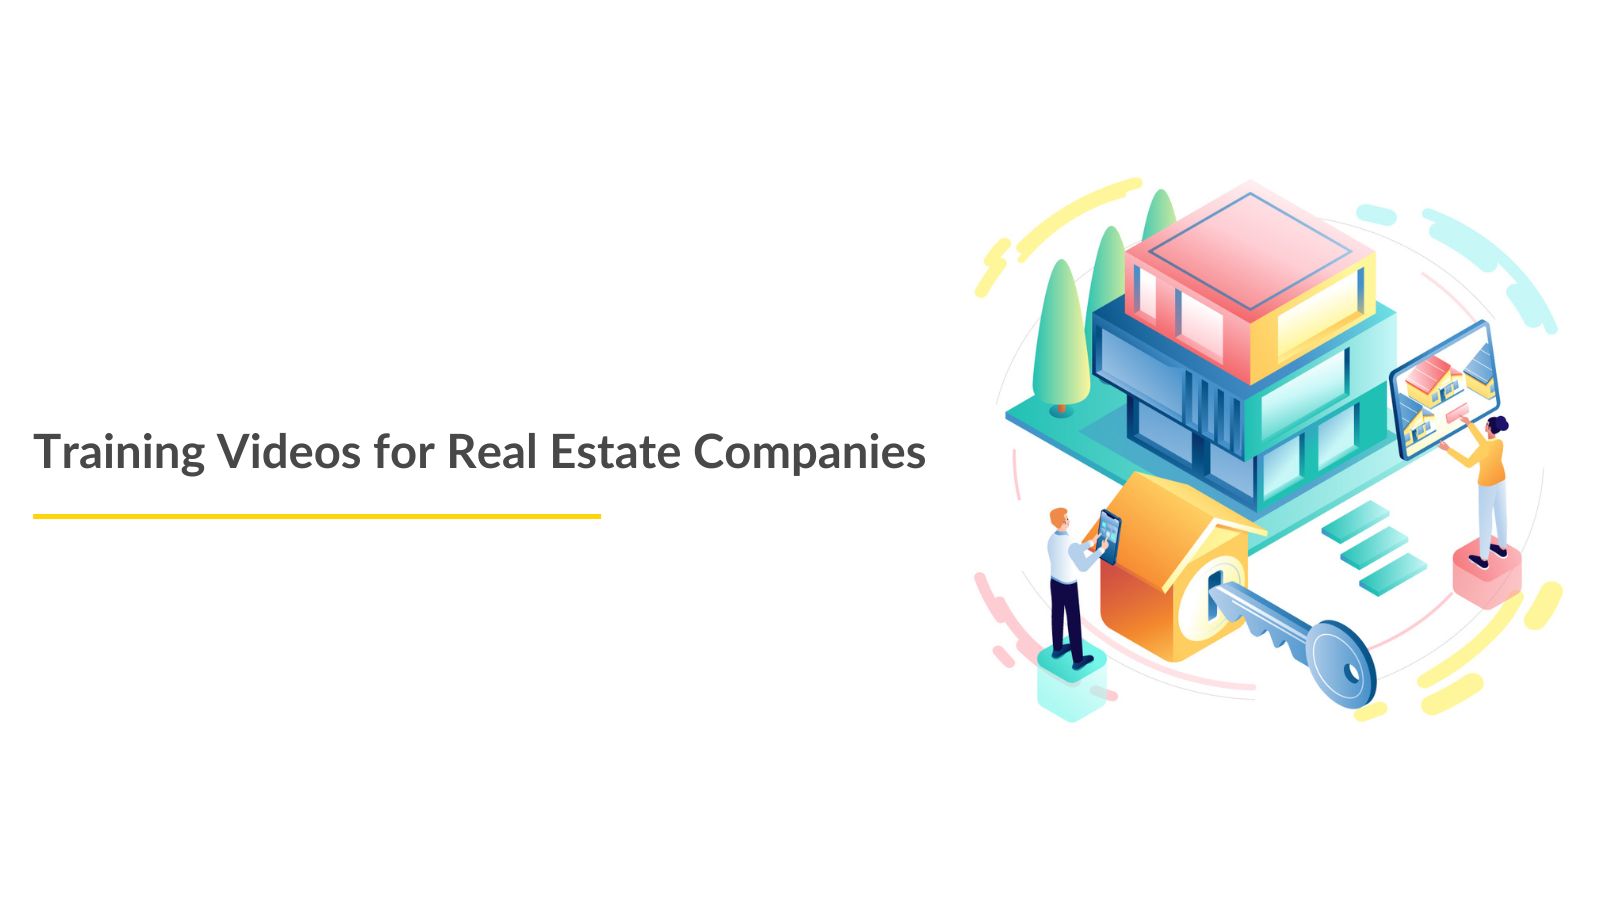 Training Videos for Real Estate Companies